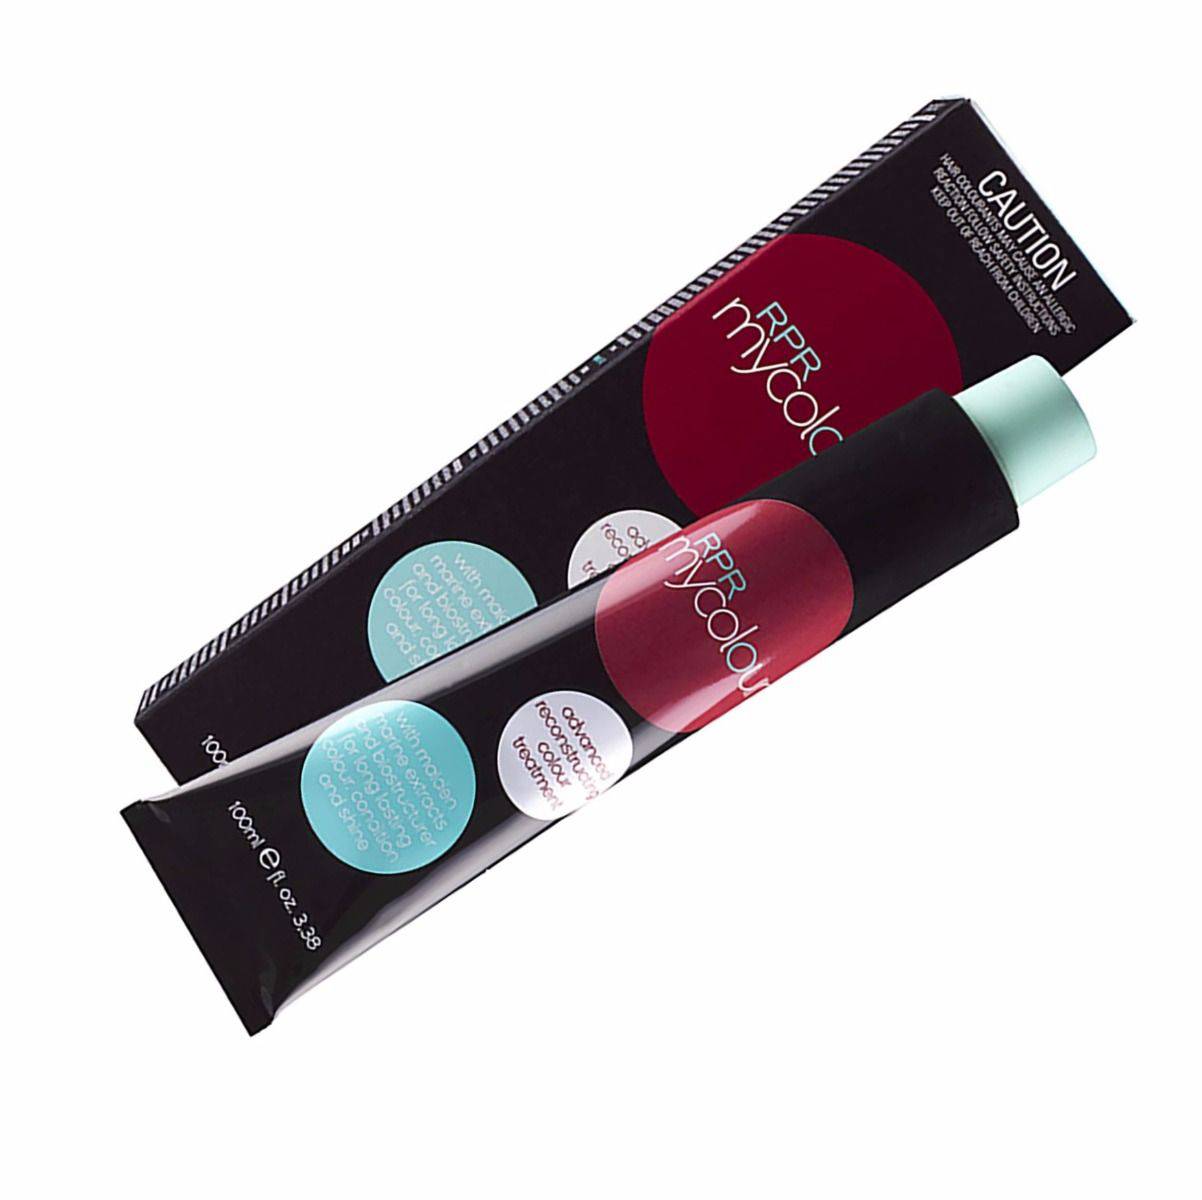 RPR My Colour 9.00 Level 9 Intense Natural 100g tube Mix 1:1.5 - On Line Hair Depot